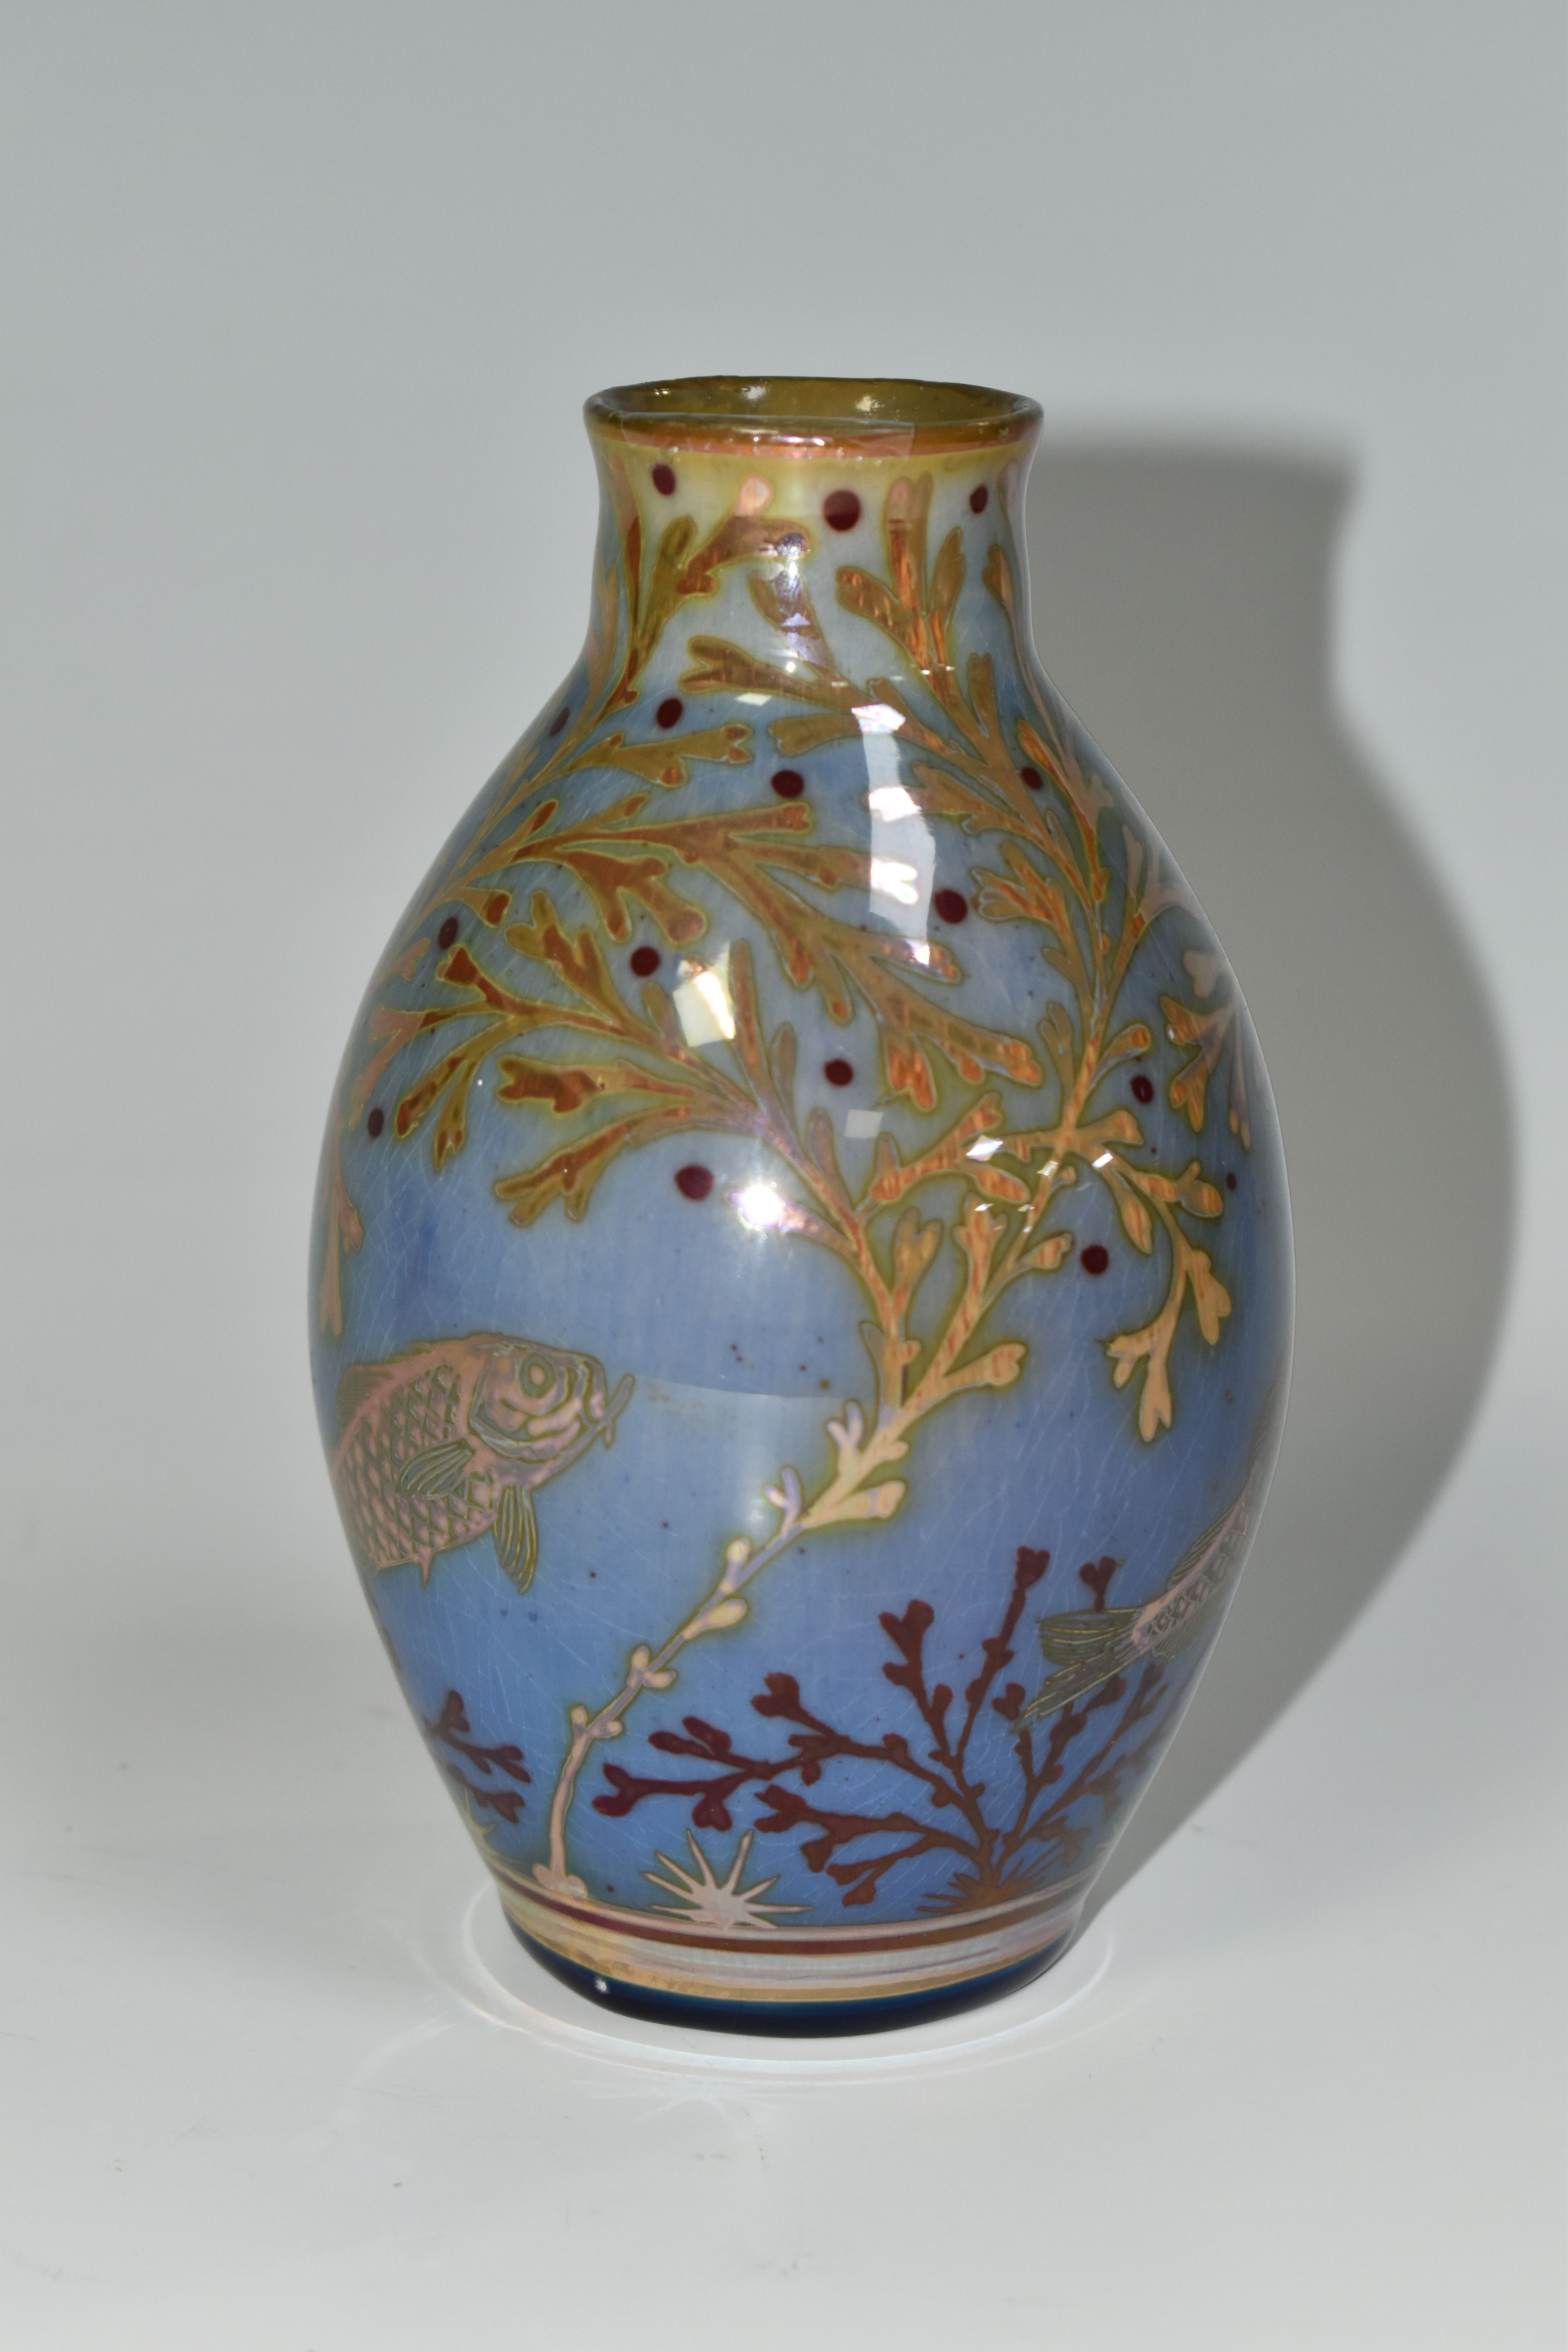 A PILKINGTON'S BALUSTER VASE, decorated with fish and pond/seaweed on a blue ground, P and B mark to